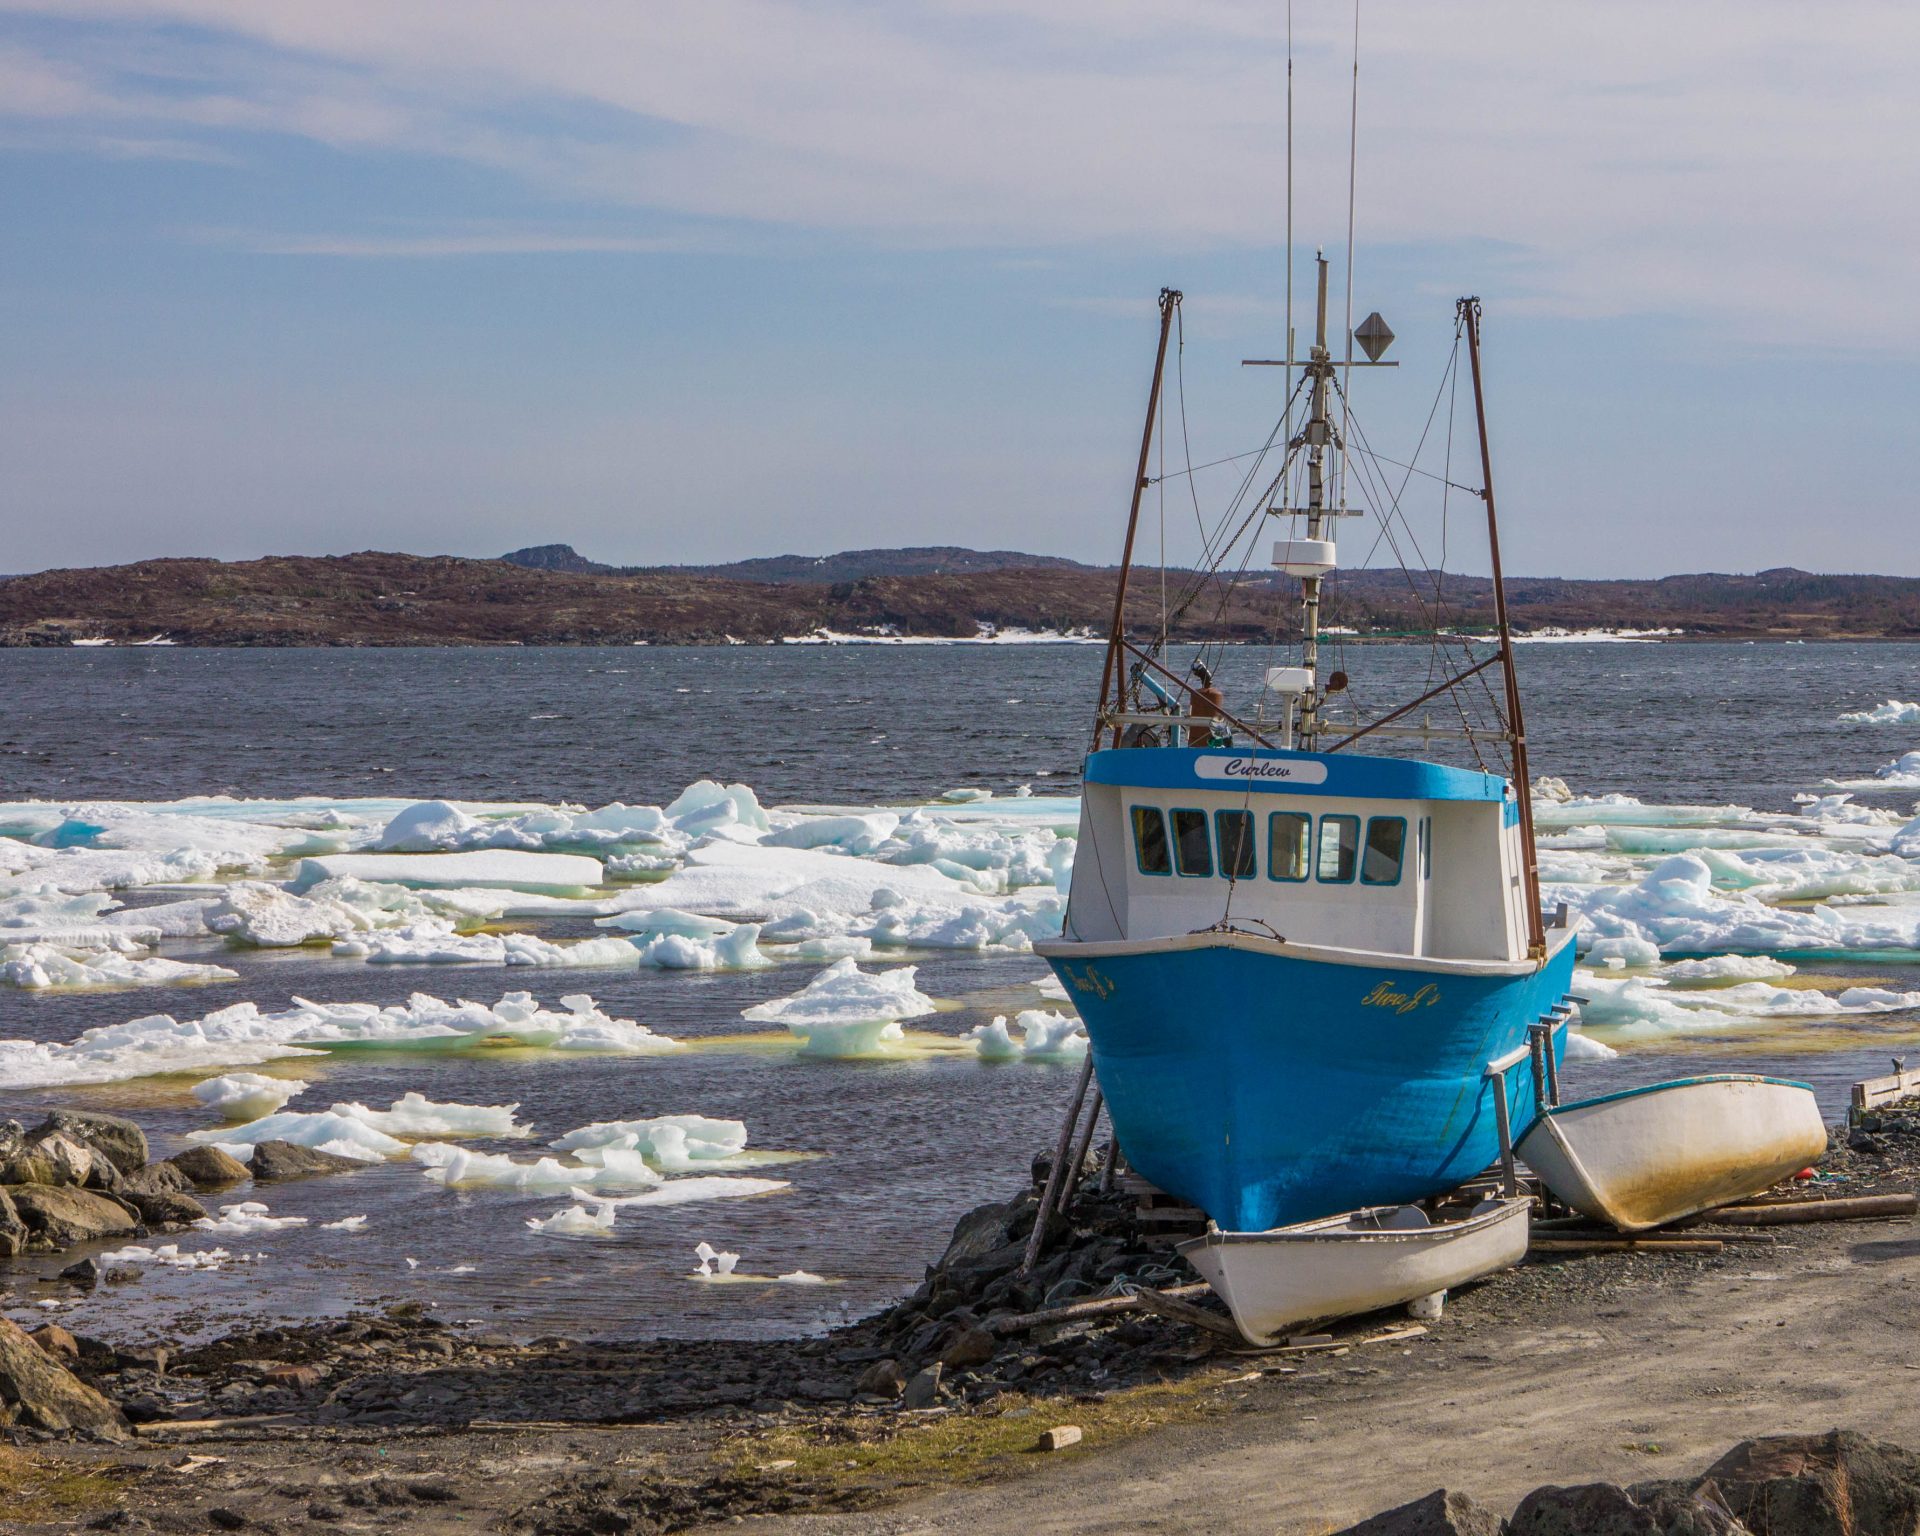 Fishing Boat docked amidst ice floes in the bay.